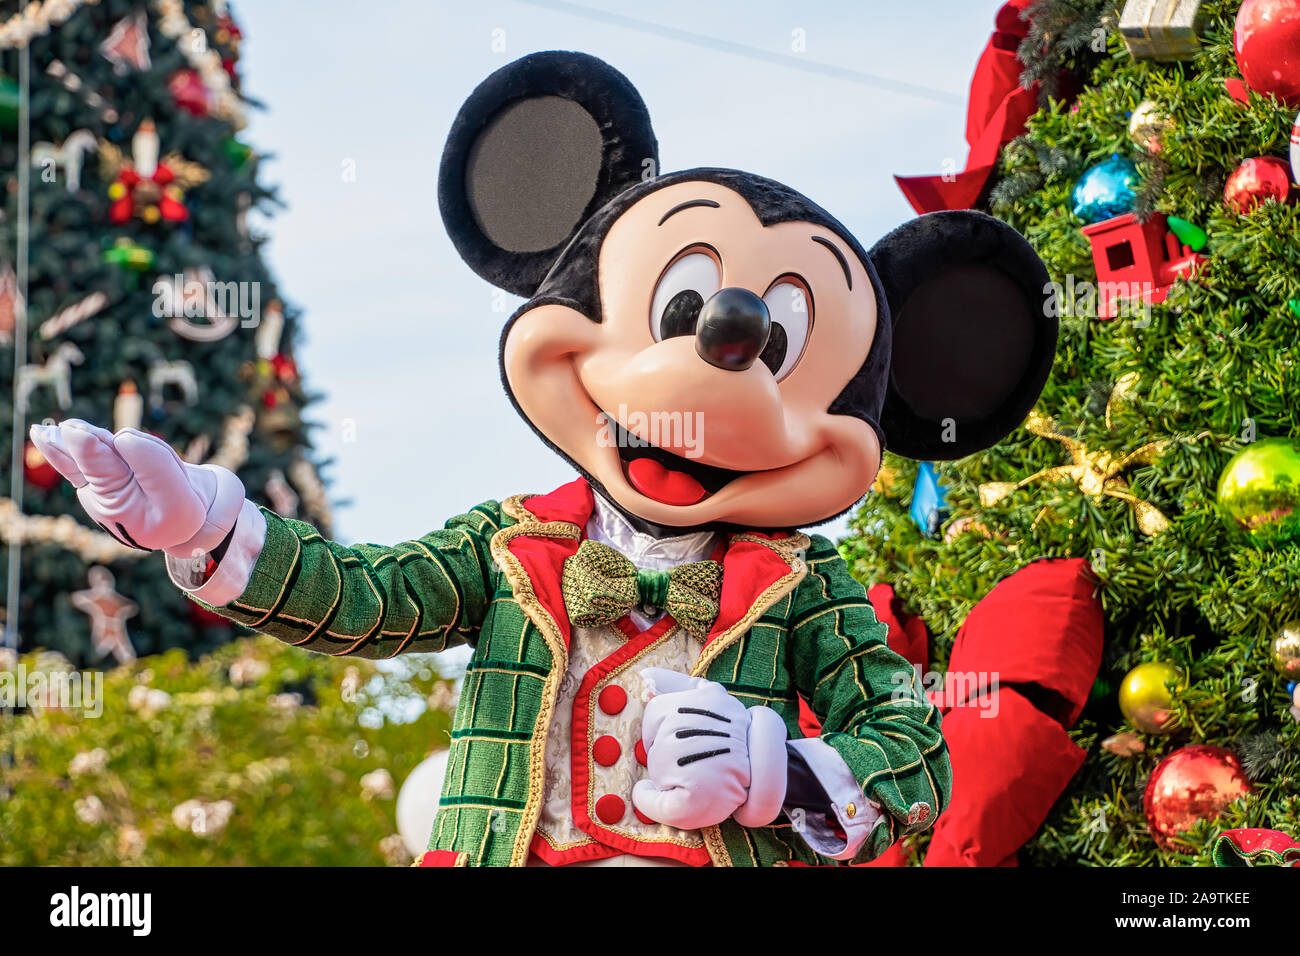 https://c8.alamy.com/compde/2a9tkee/mickey-mouse-in-weihnachten-outfits-in-der-weihnachtszeit-parade-2a9tkee.jpg